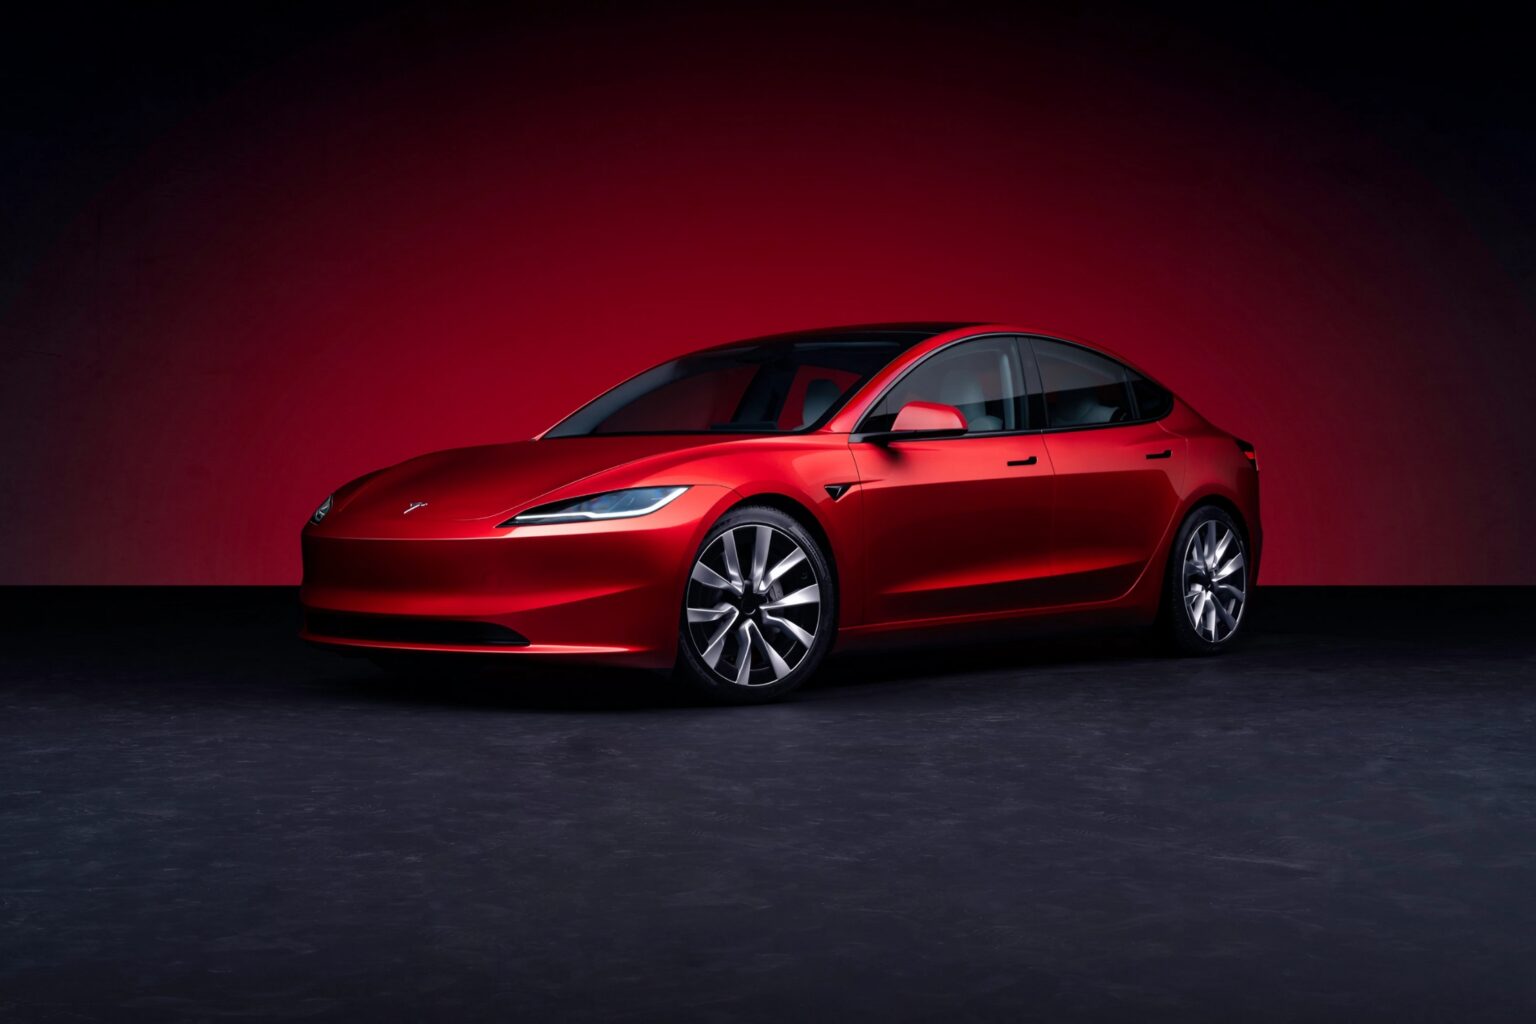 Tesla Model 3 gets Upgraded: New Design, Rear Touchscreen, and Improved Range